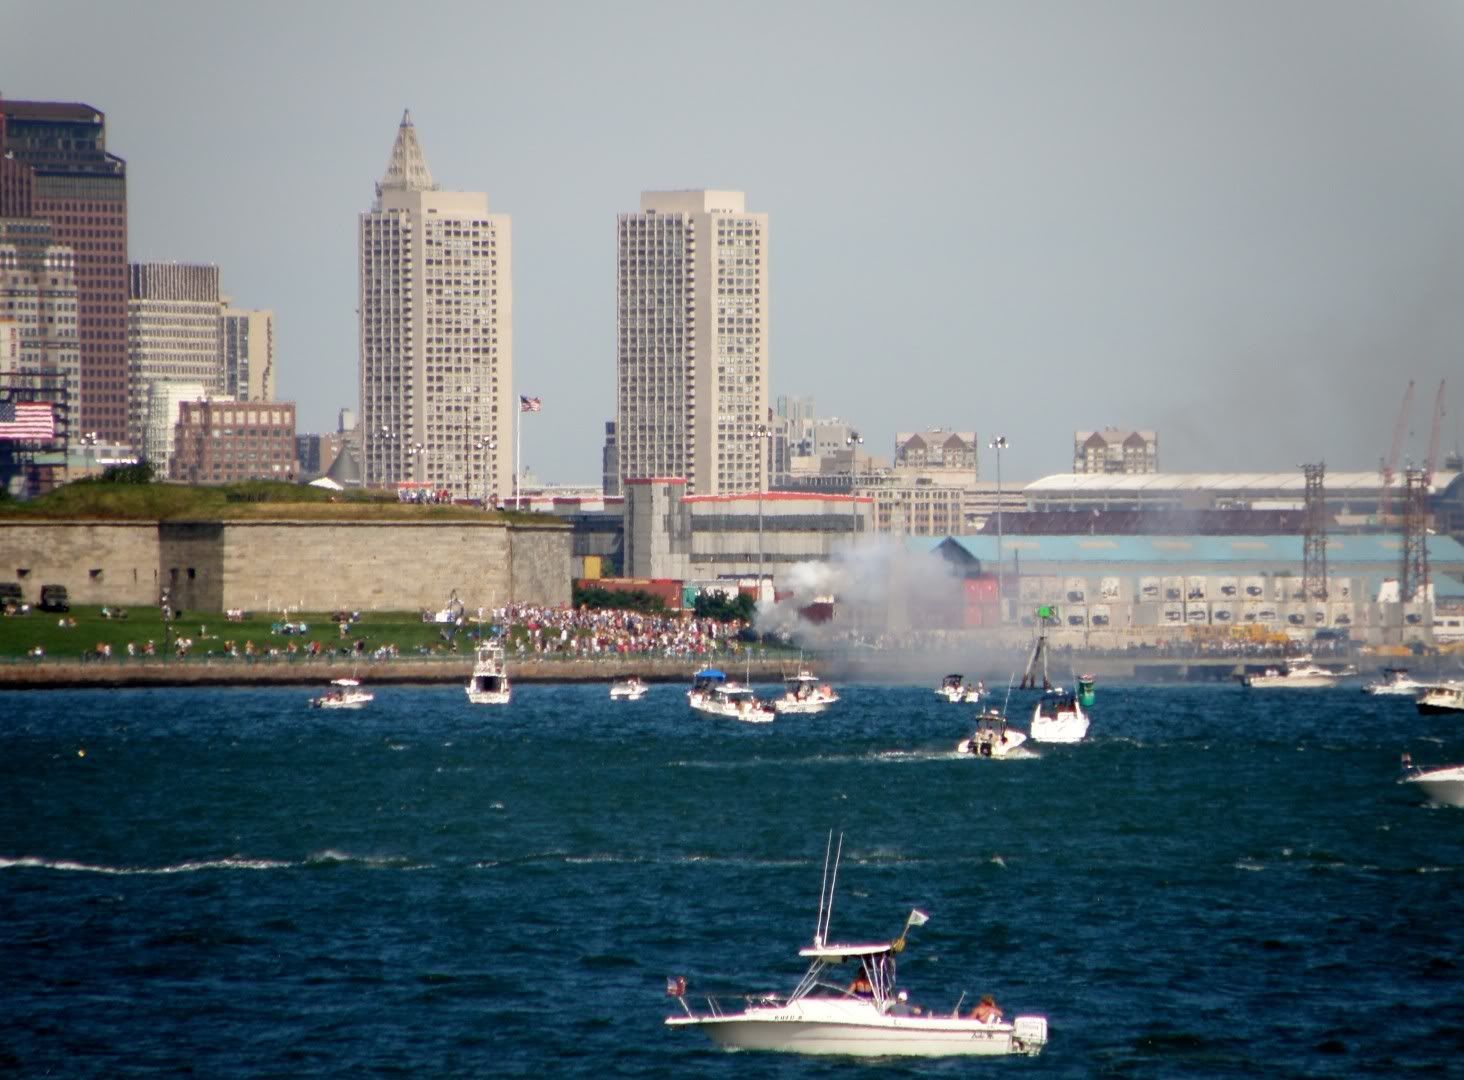 cannon fire salutes from Castle island